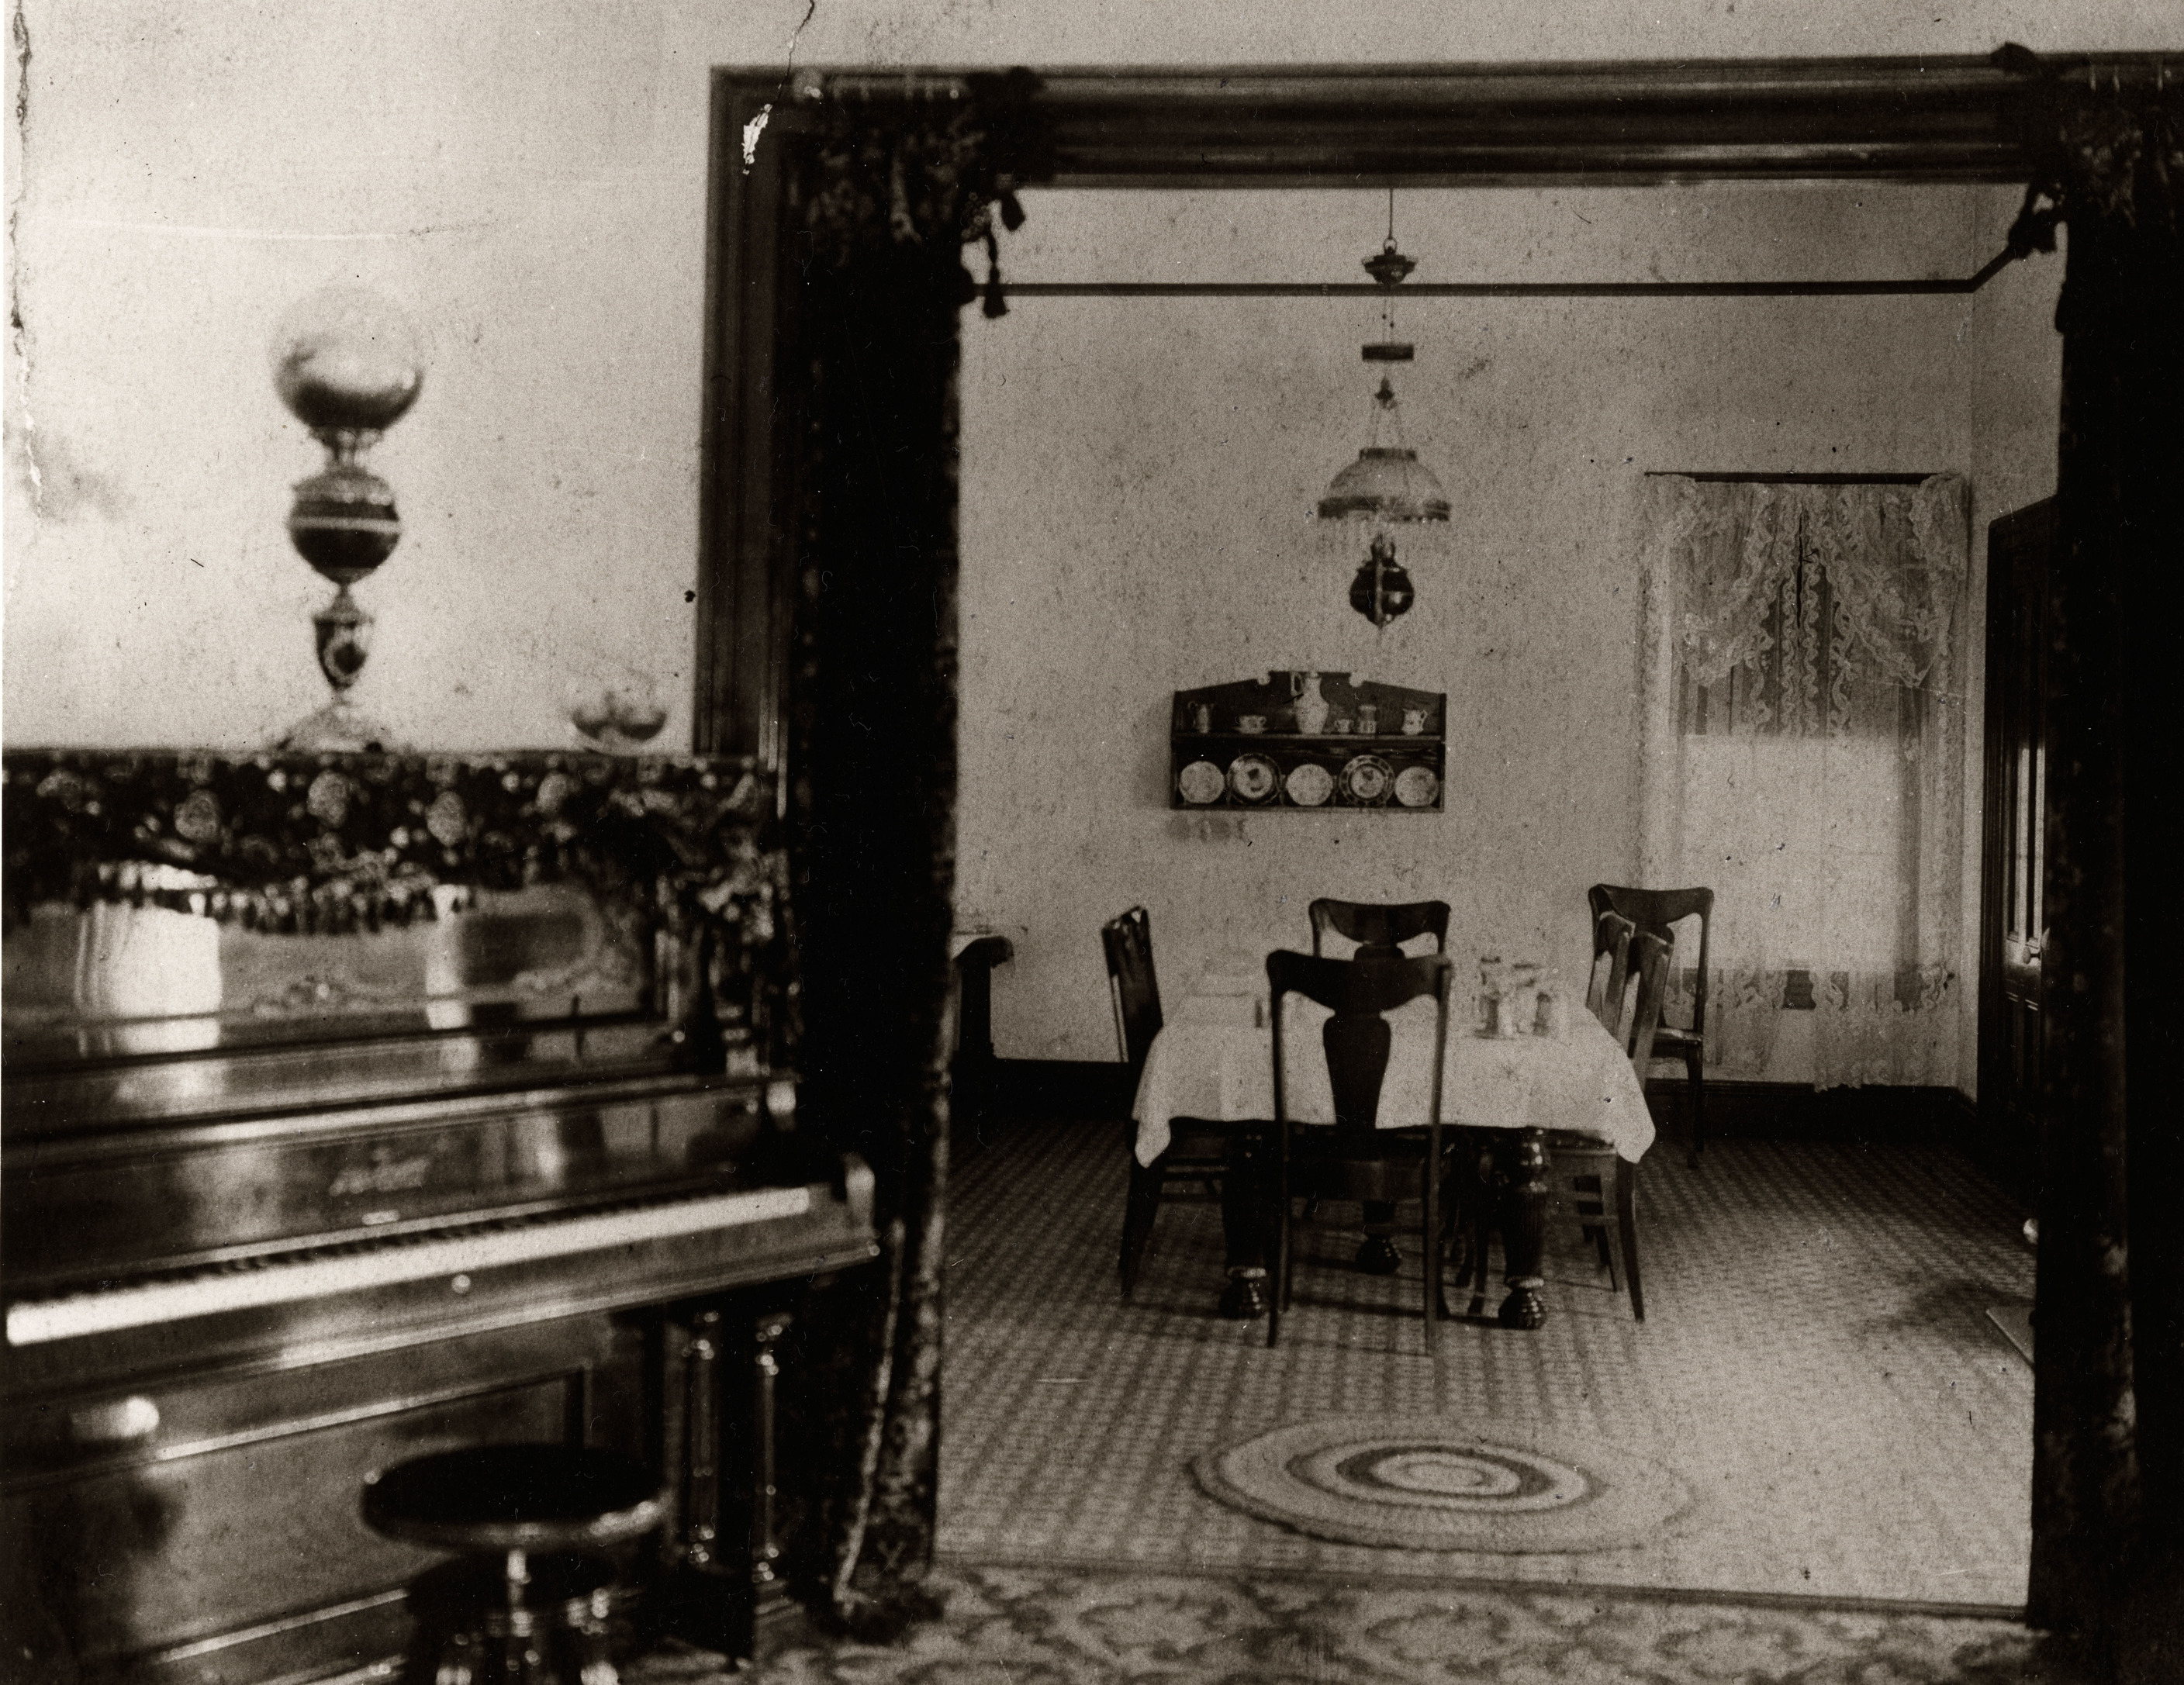 Black and white photograph of rooms inside a house with a dining room table and a piano